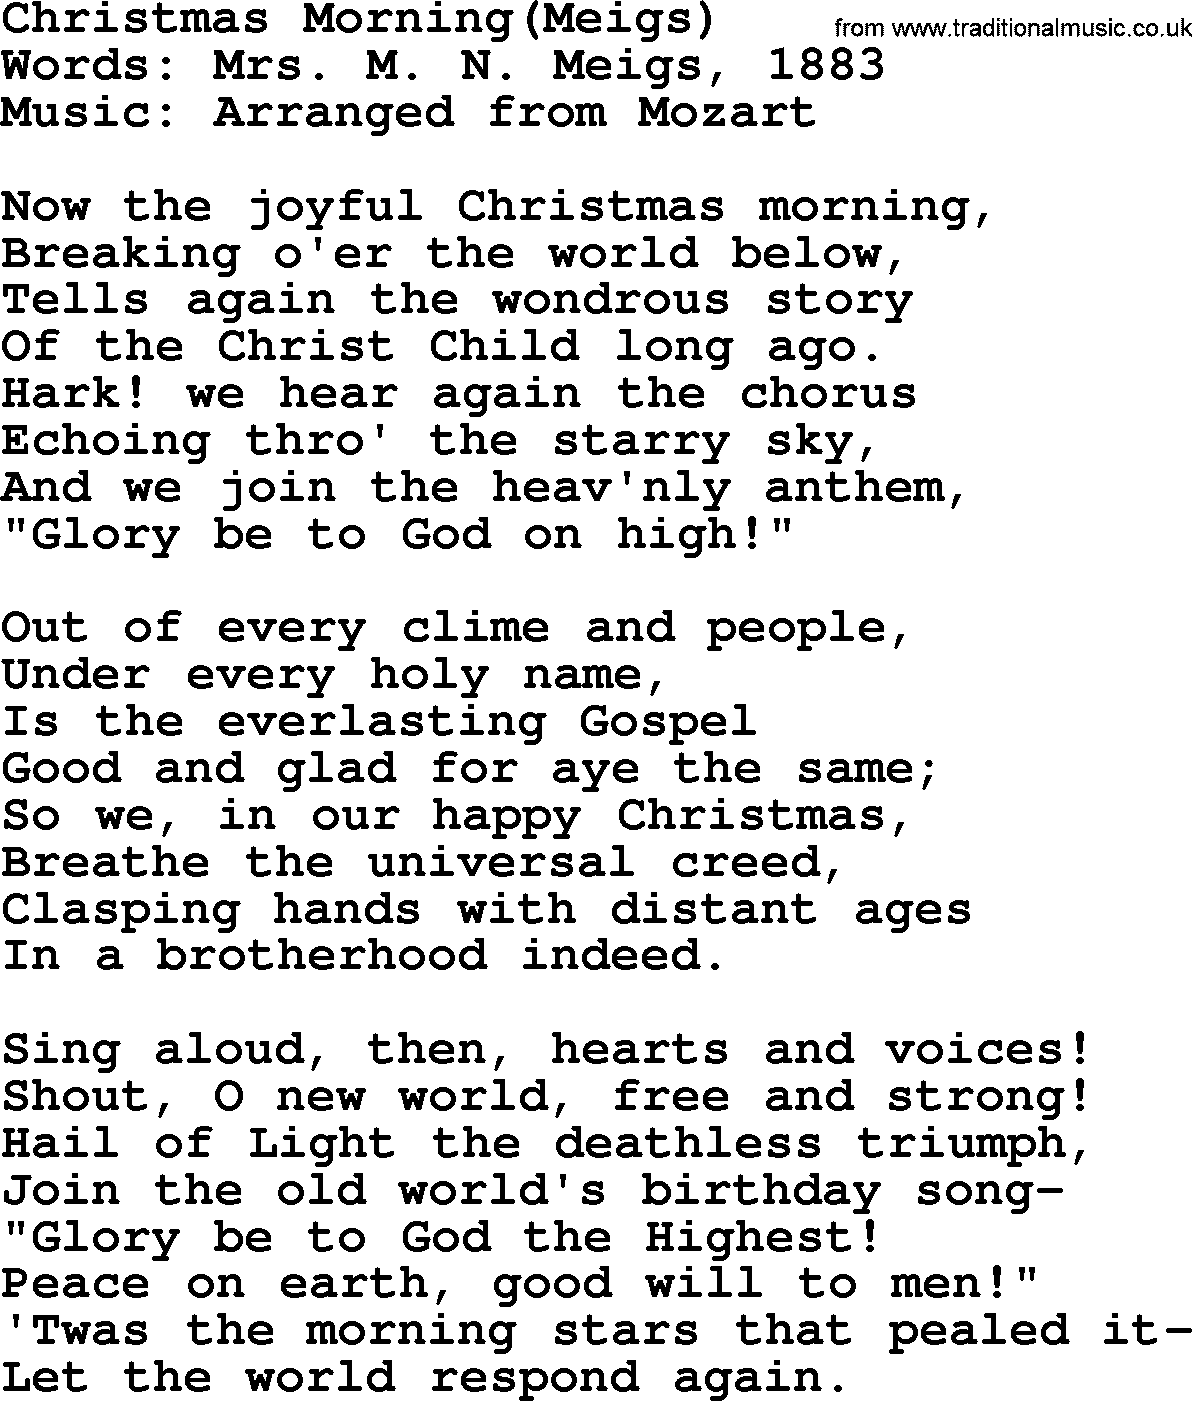 280 Christmas Hymns and songs with PowerPoints and PDF, title: Christmas Morning(meigs), lyrics, PPT and PDF